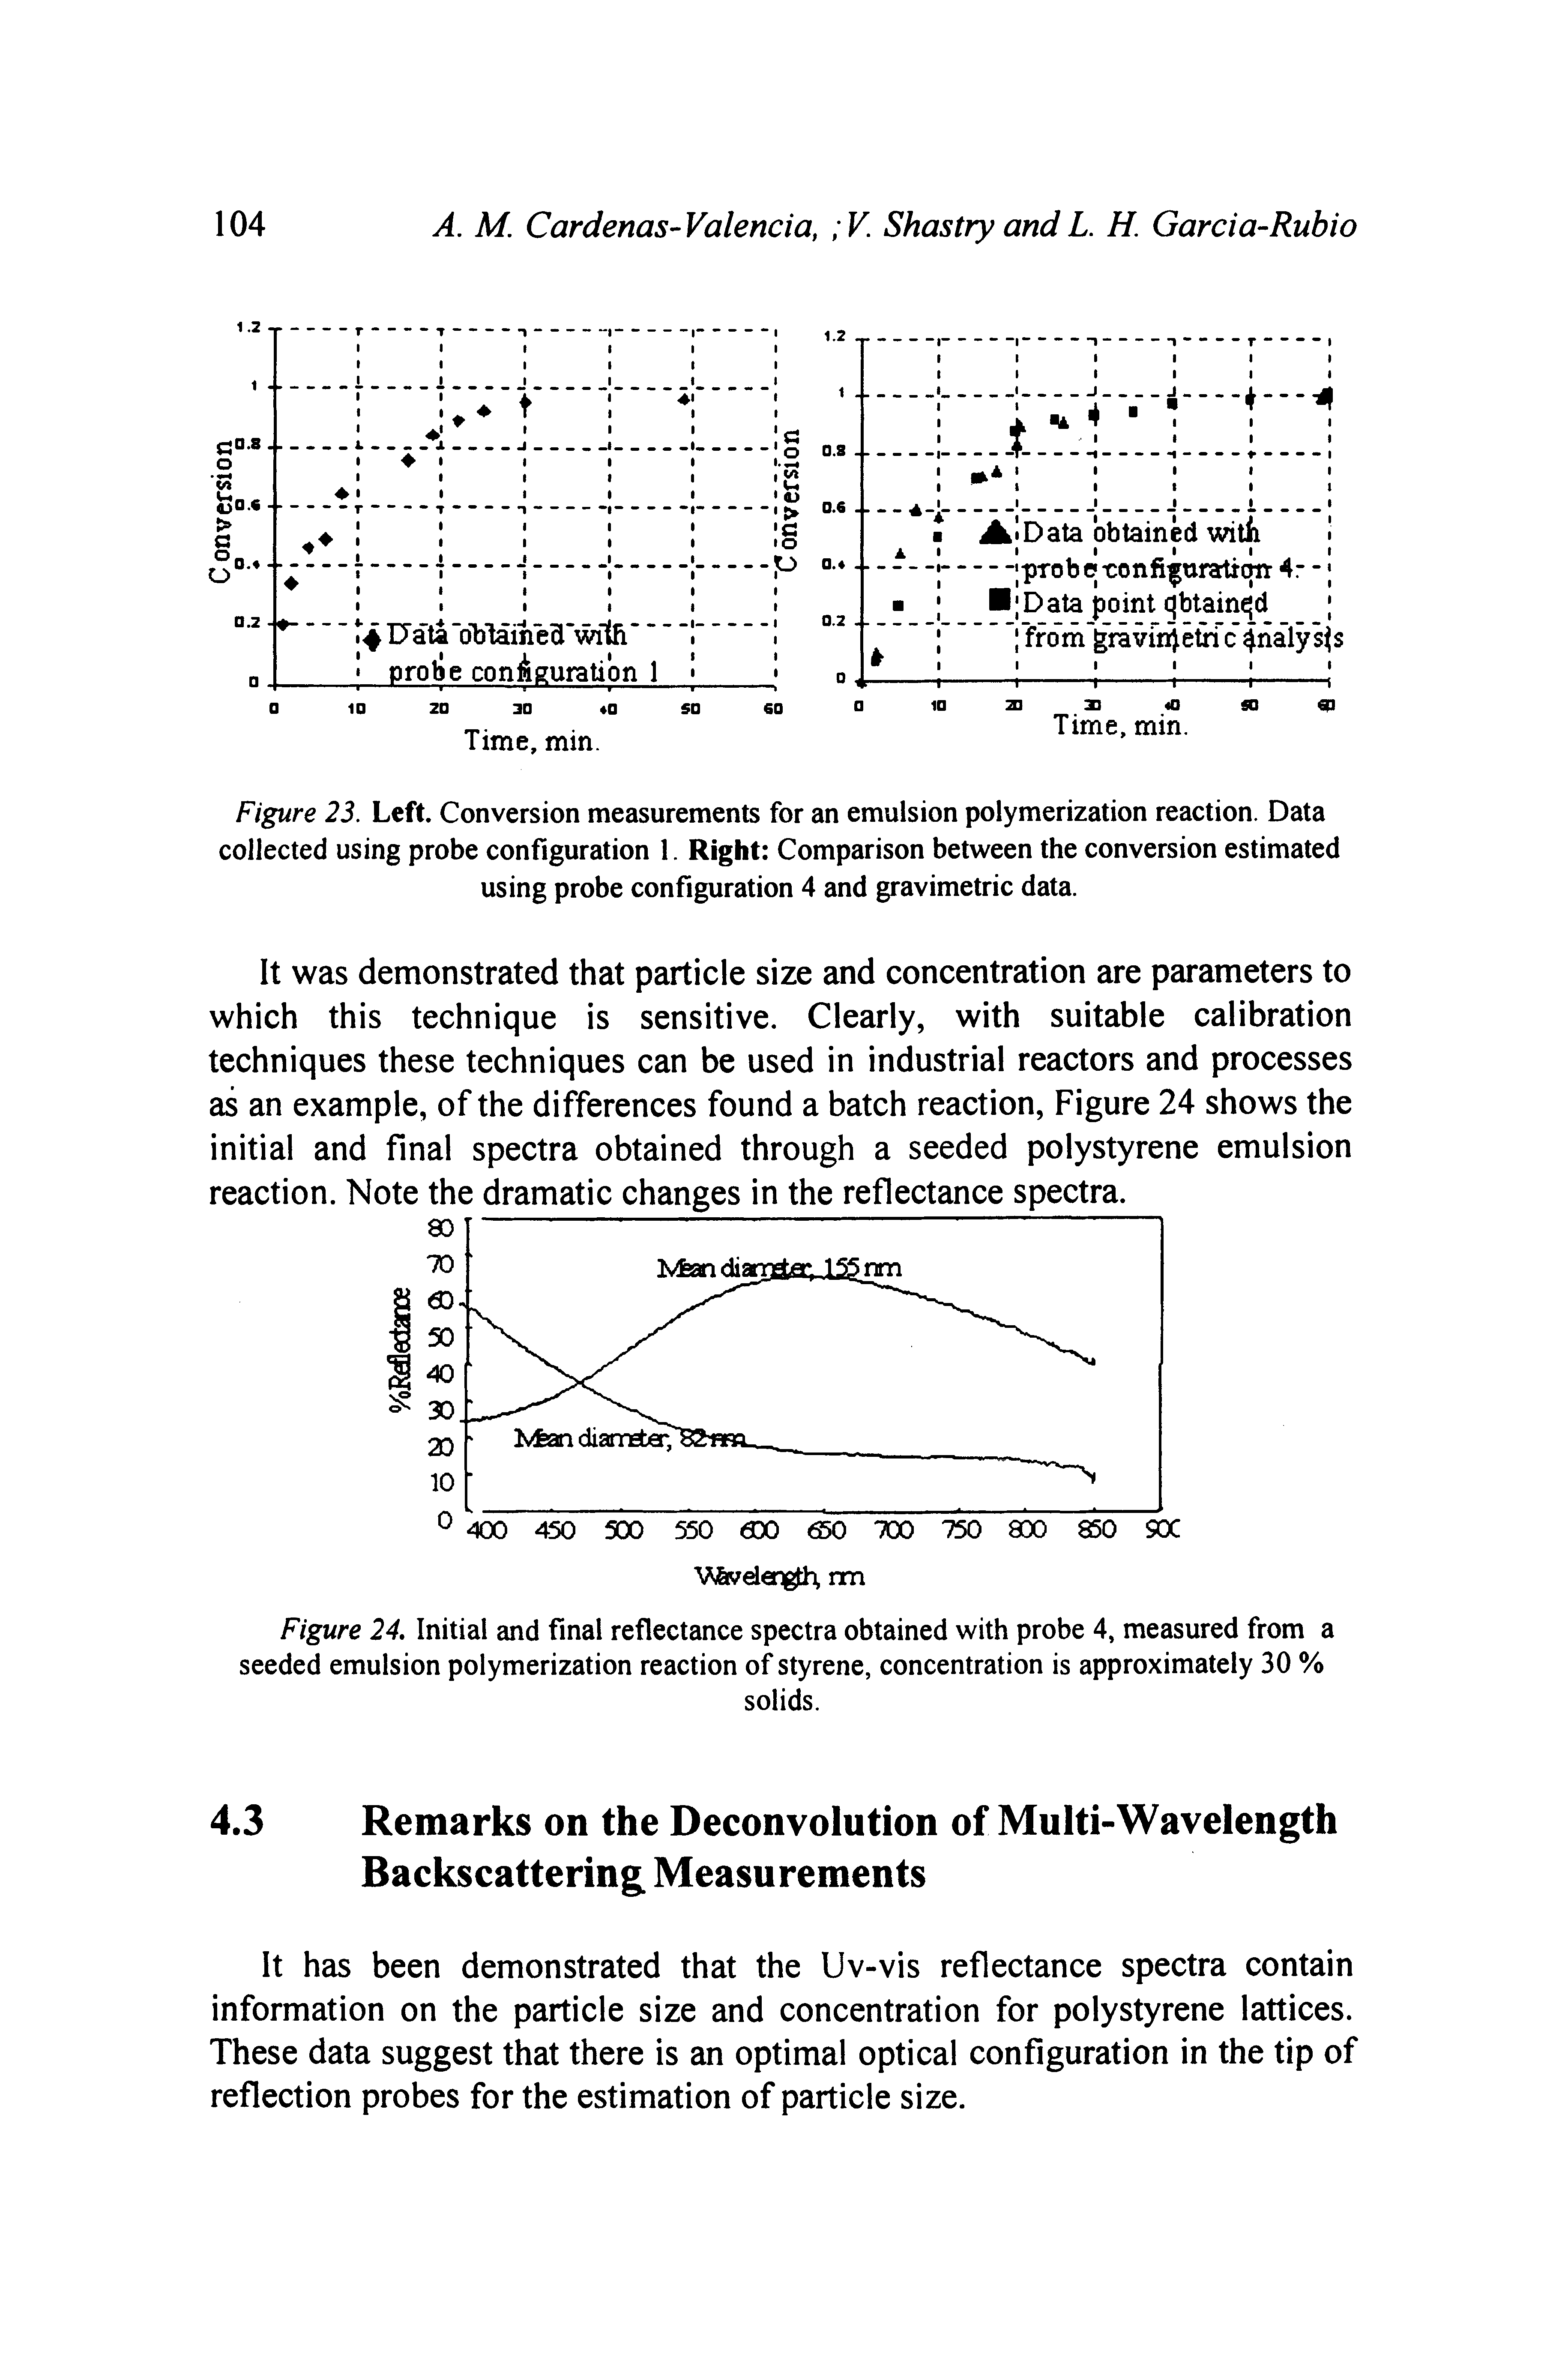 Figure 23. Left. Conversion measurements for an emulsion polymerization reaction. Data collected using probe configuration 1. Right Comparison between the conversion estimated using probe configuration 4 and gravimetric data.